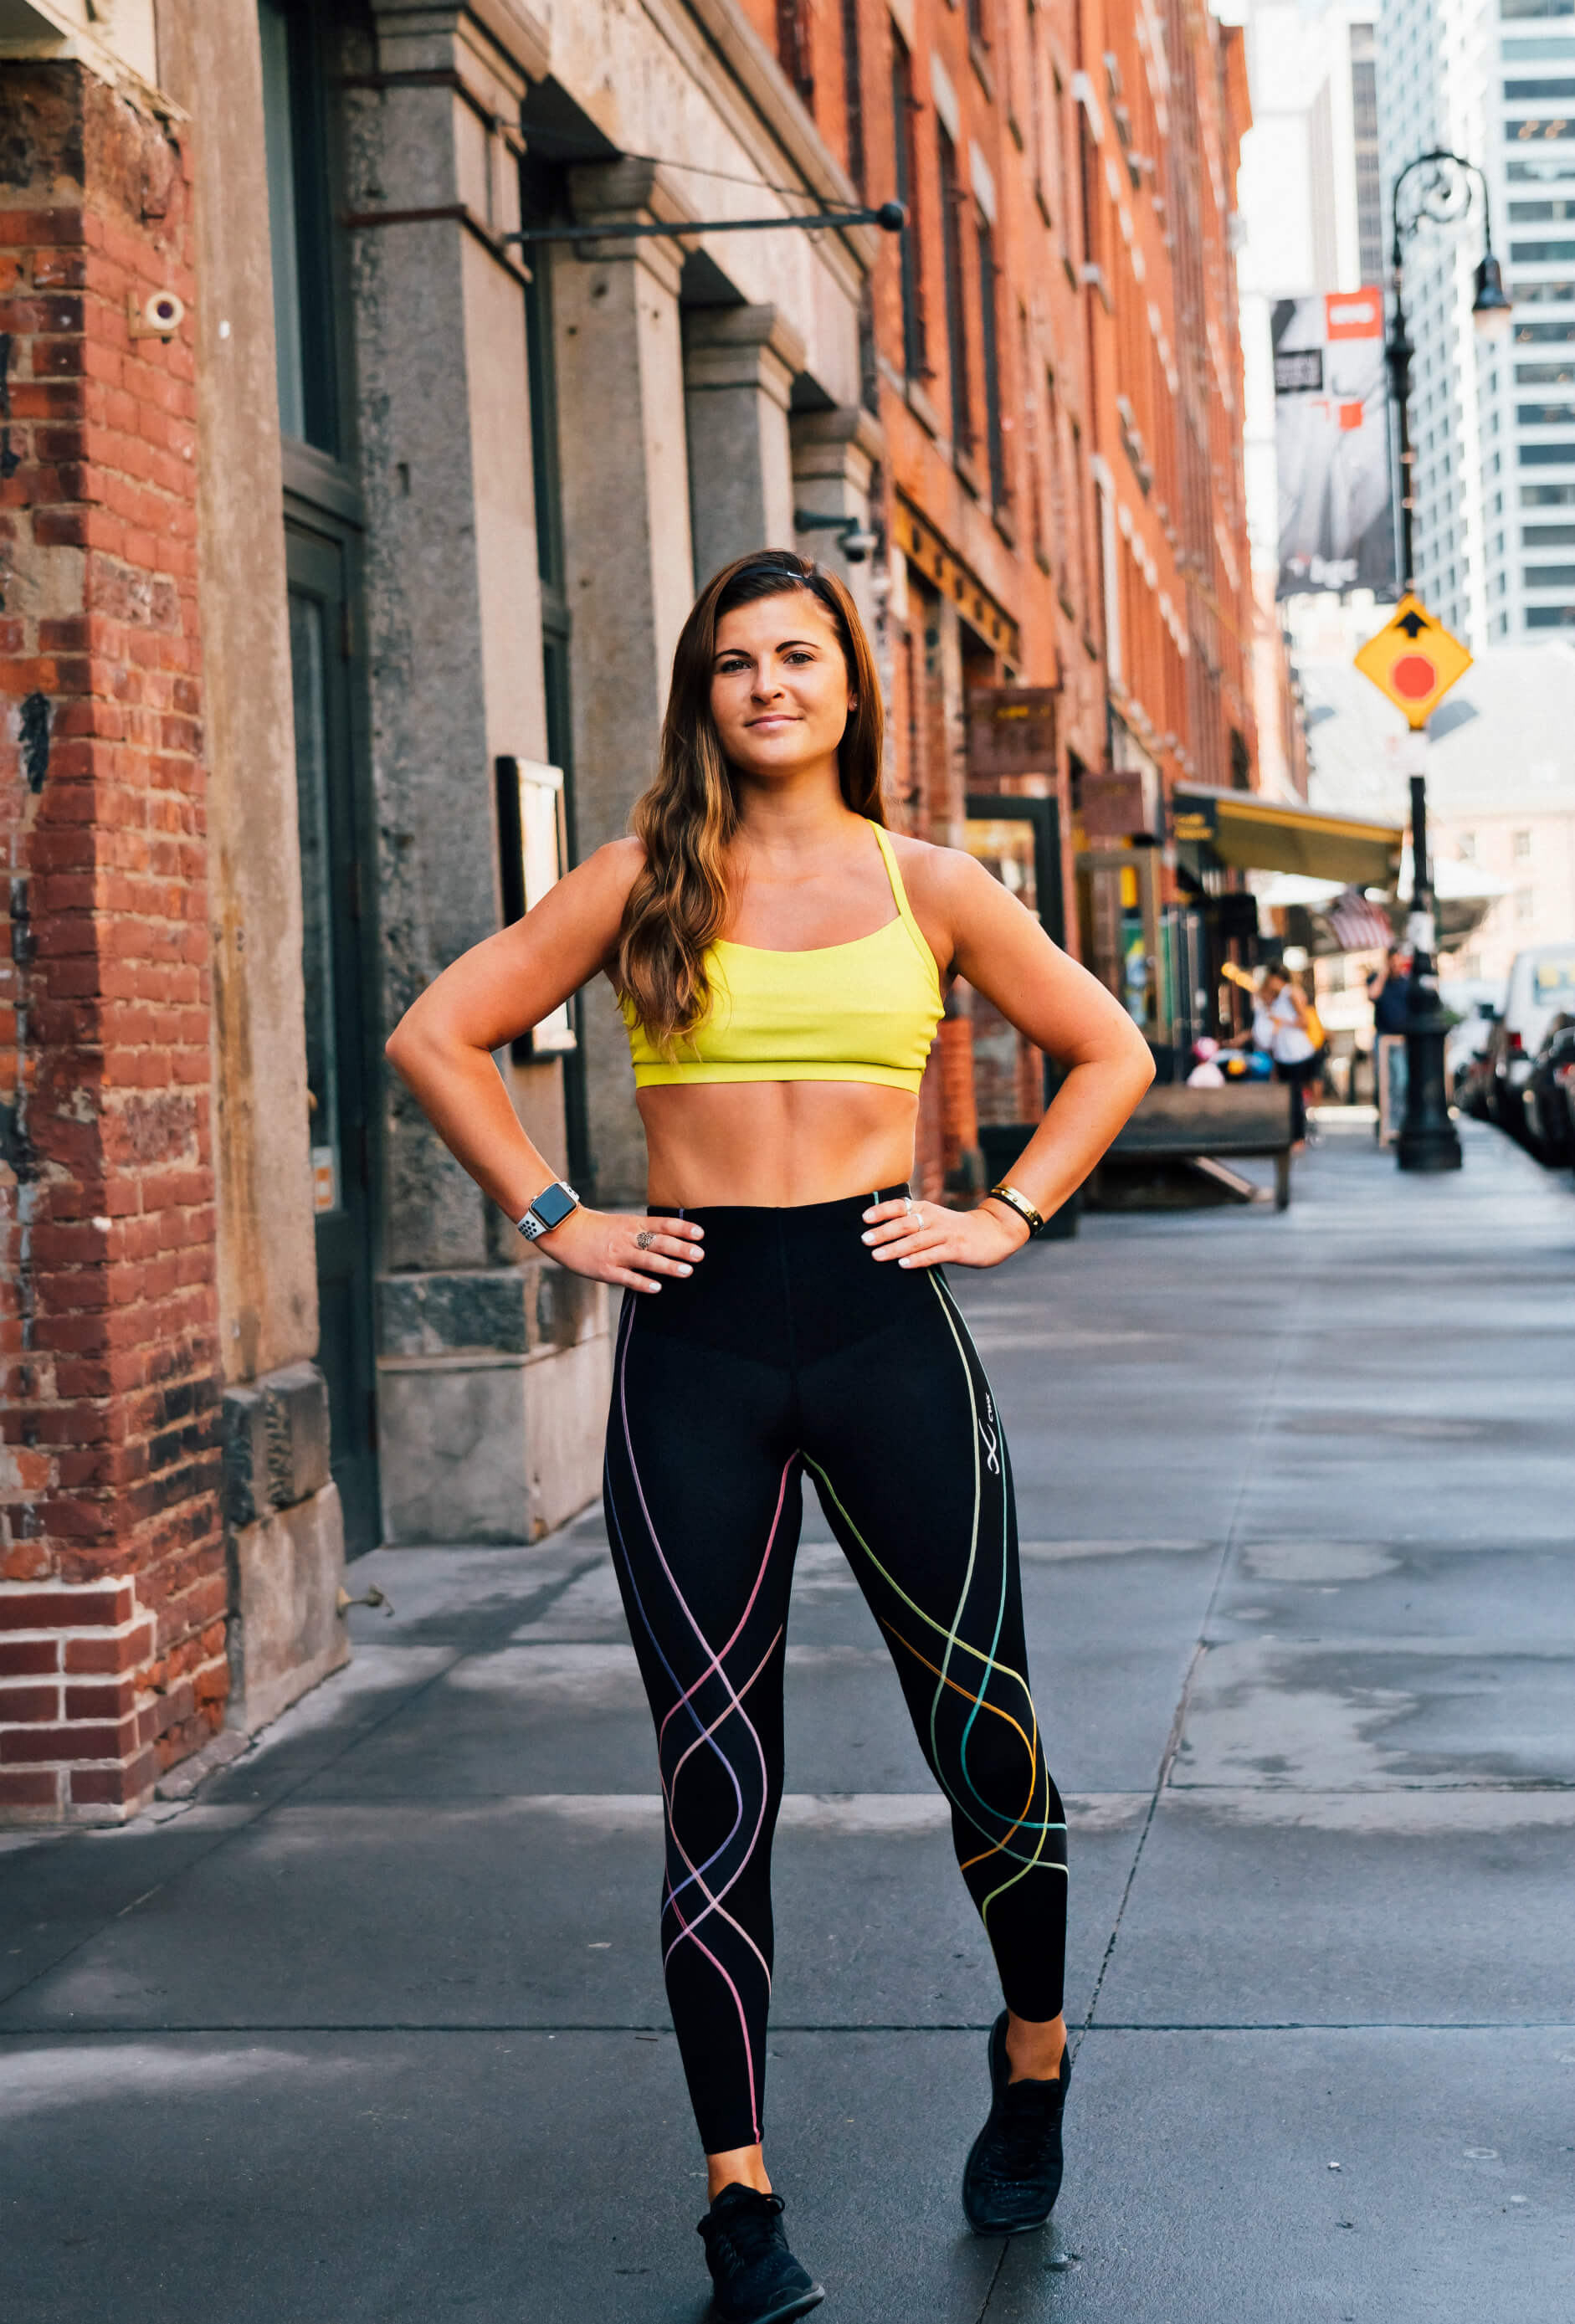 CW-X Endurance Generator Tights, Nike Apple Watch Sports Band, Fabletics Neon Sports Bra, Fitness, Workout Outfit, Tilden of To Be Bright